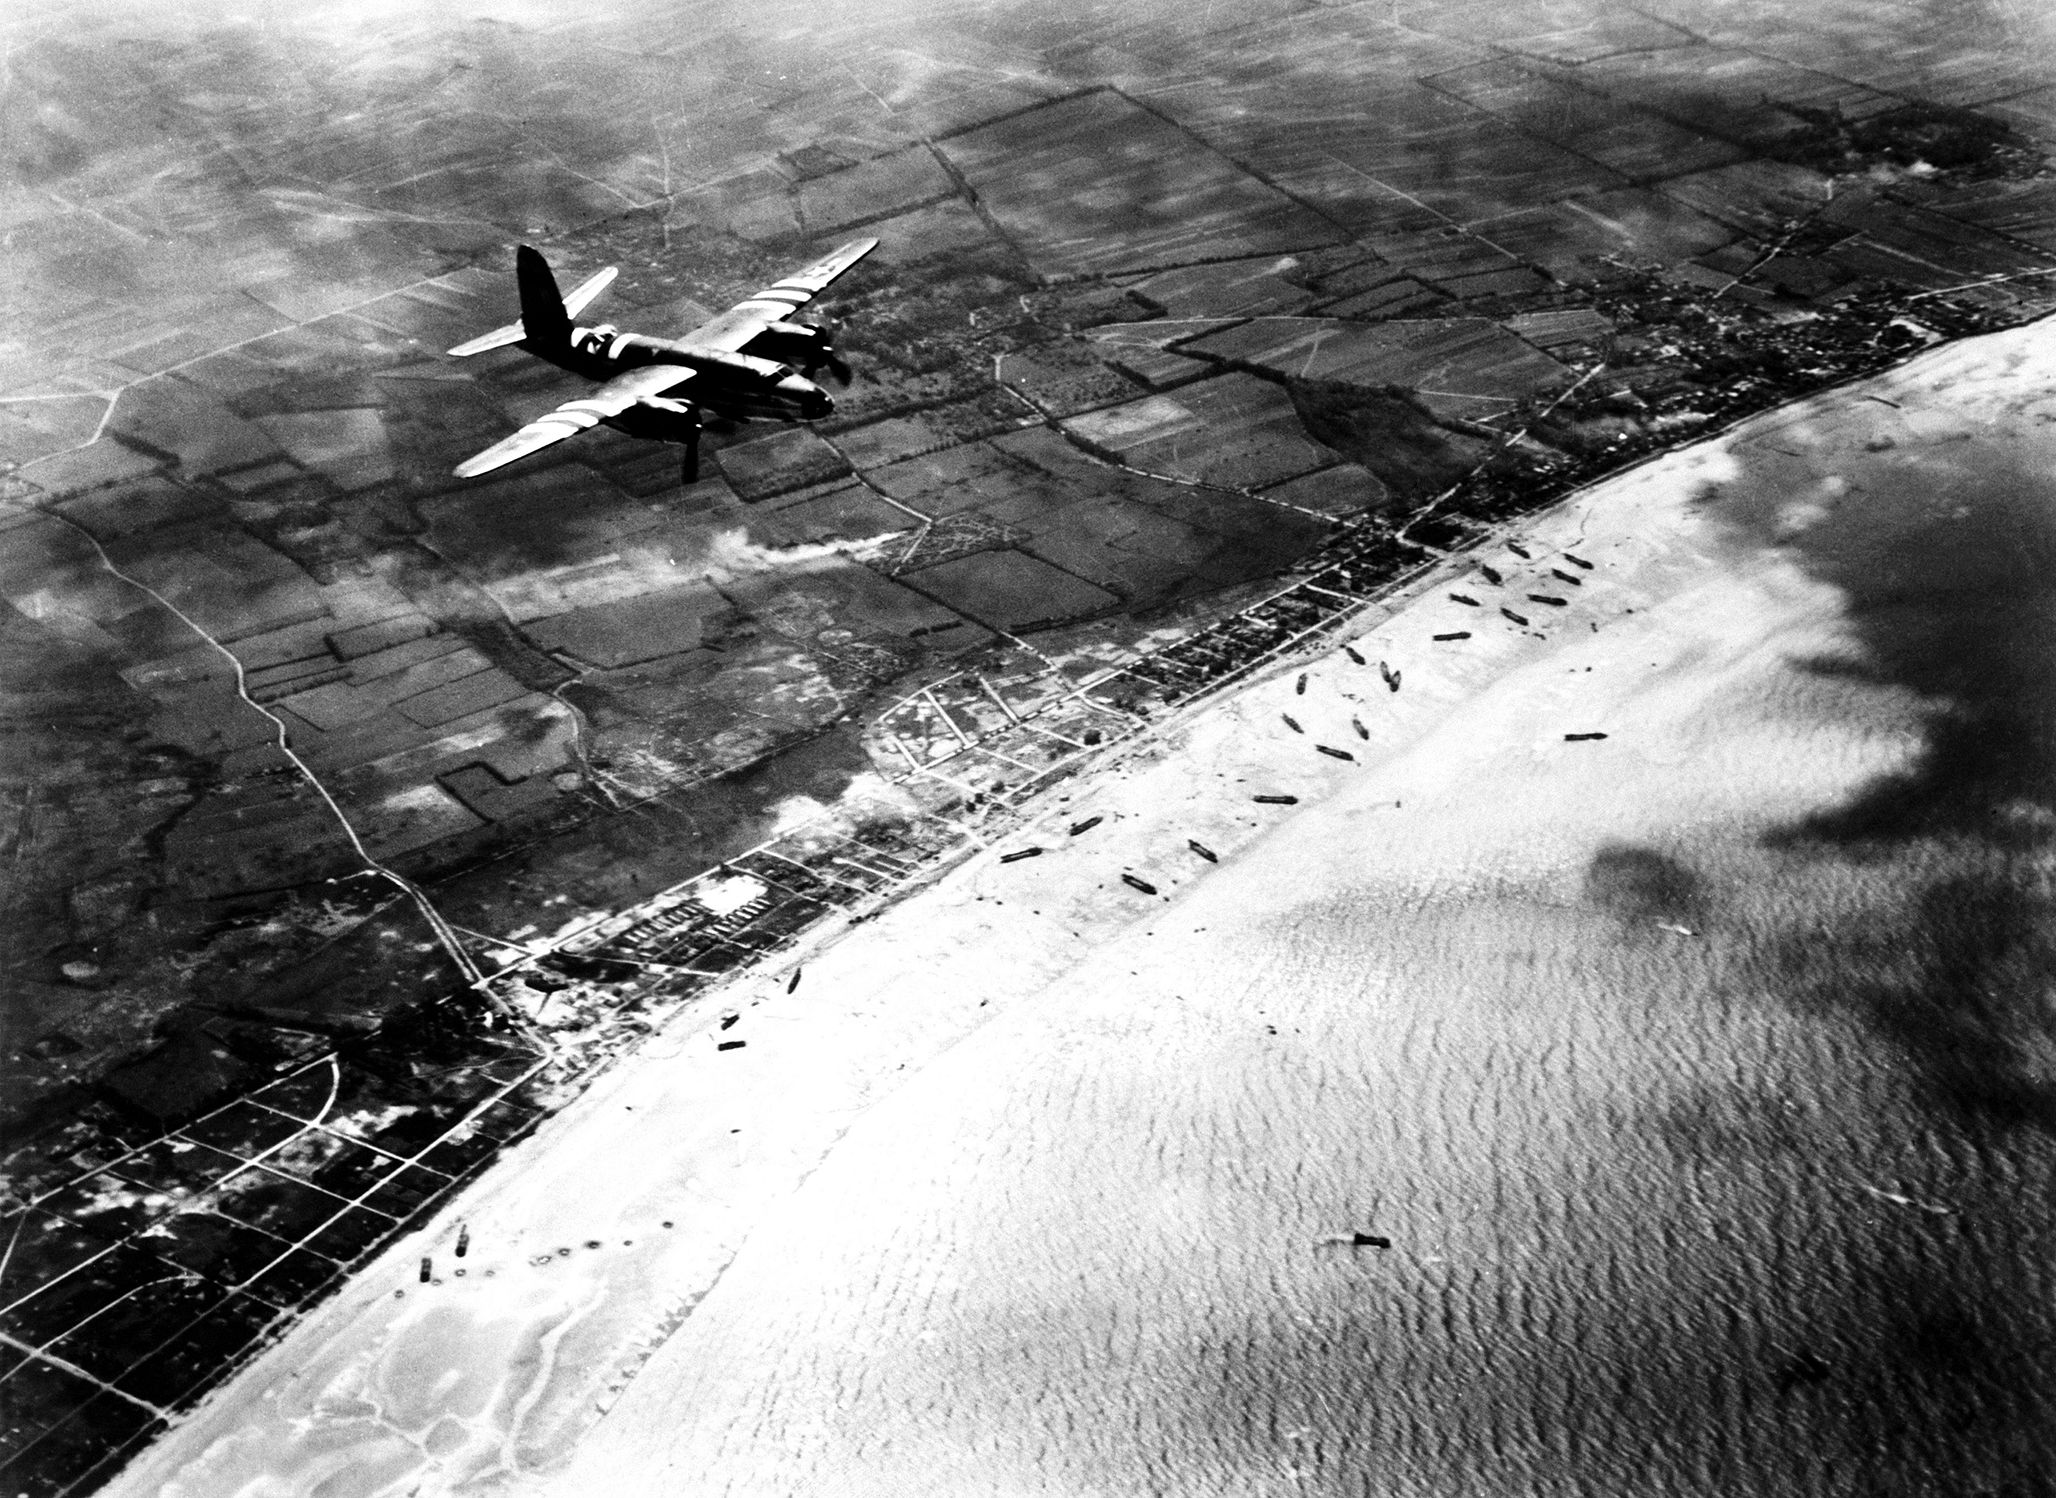 An American Martin B-26 Marauder bomber flies over Sword Beach en route to its airfield in Britain on D-Day. Lyon-sur-Met is shown at upper right.